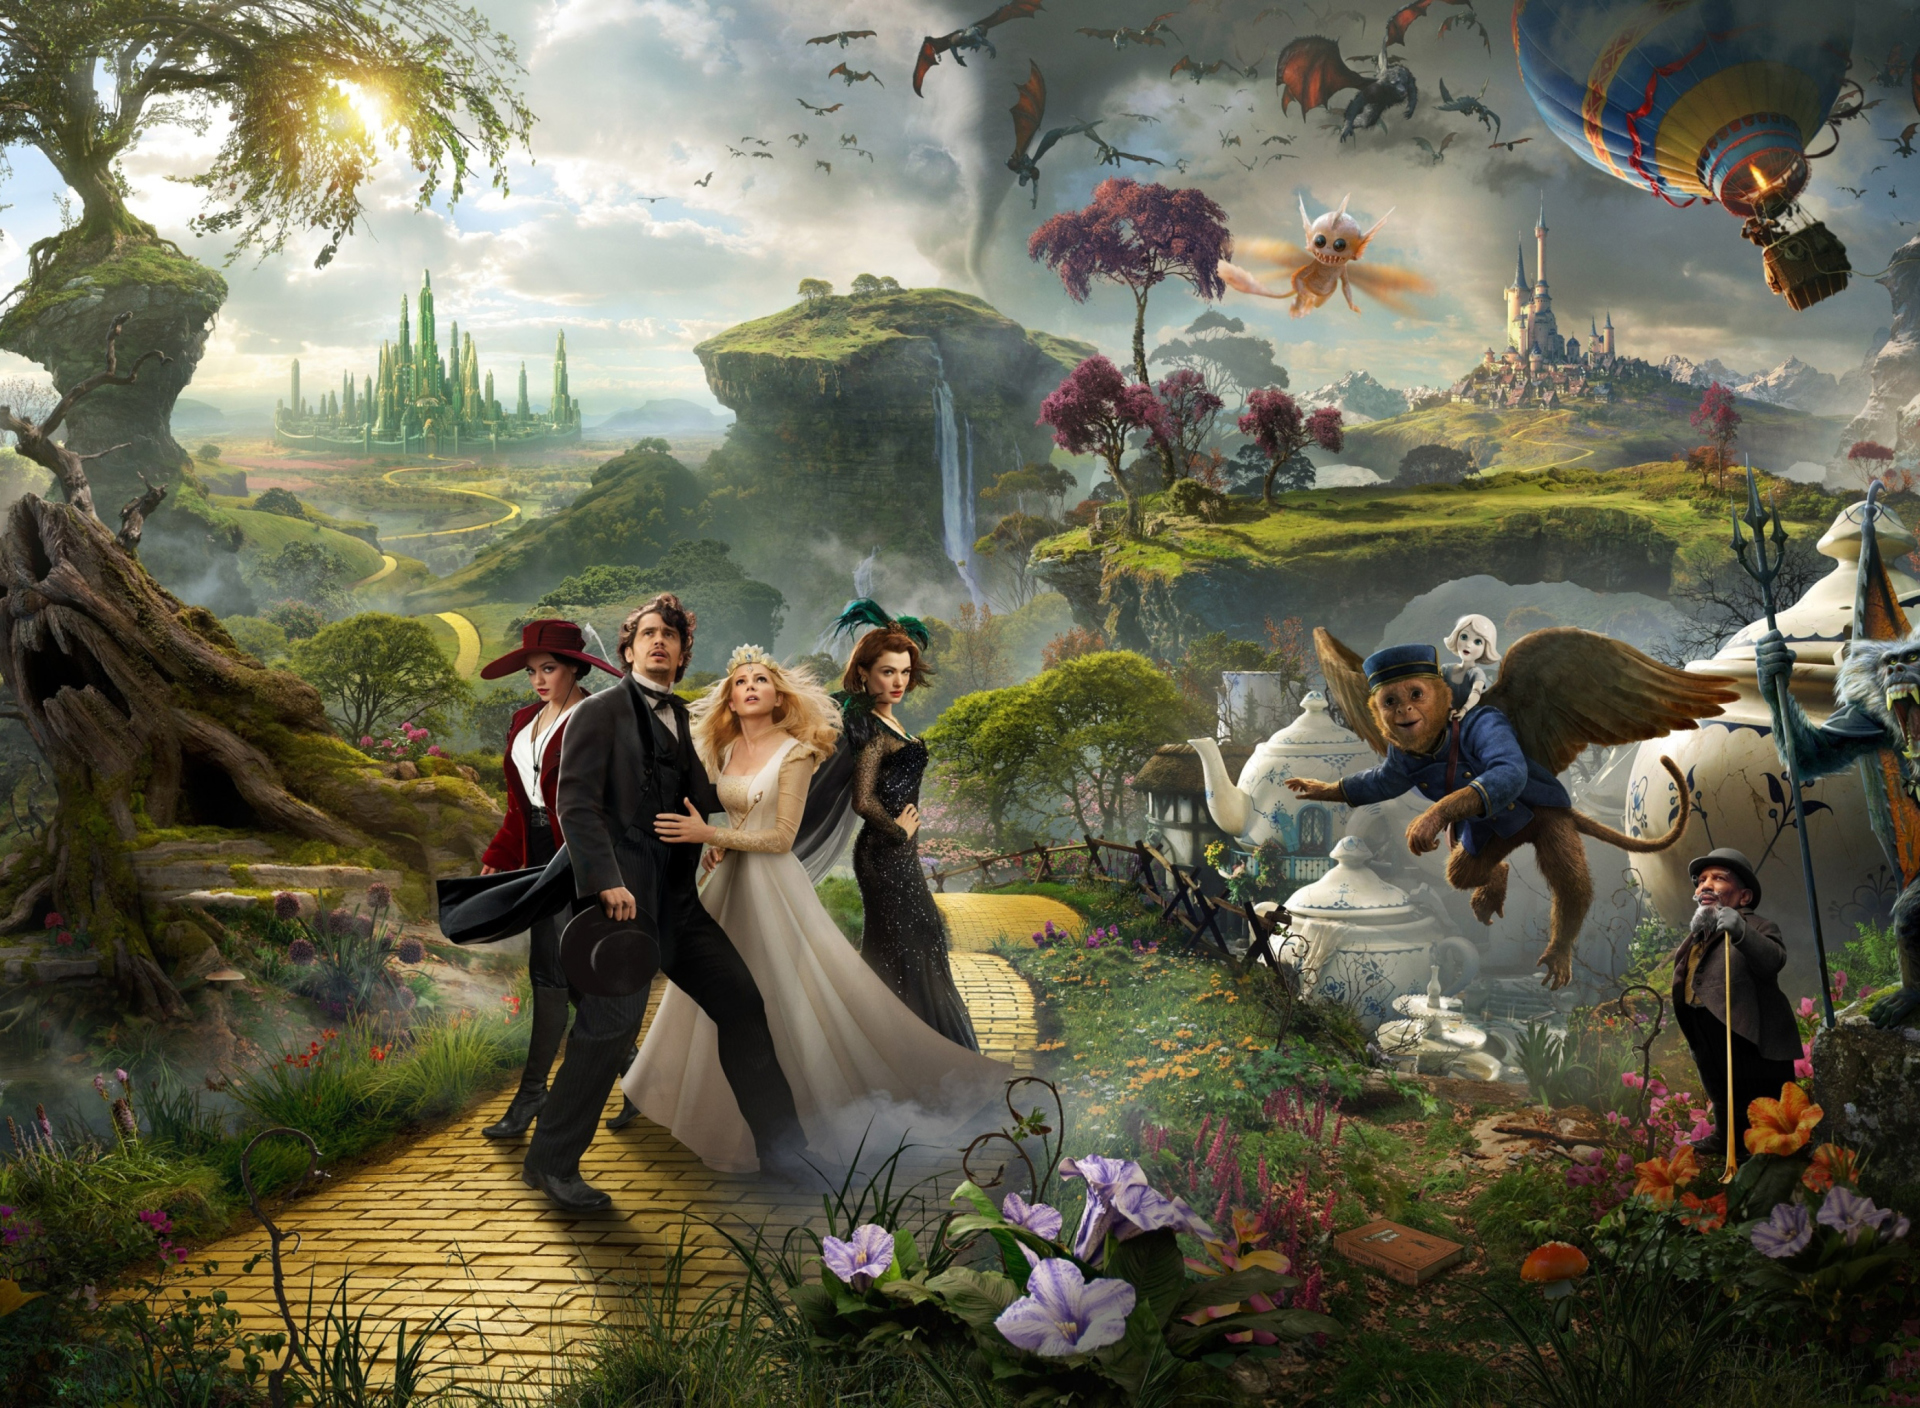 Oz The Great And Powerful 2013 Movie wallpaper 1920x1408